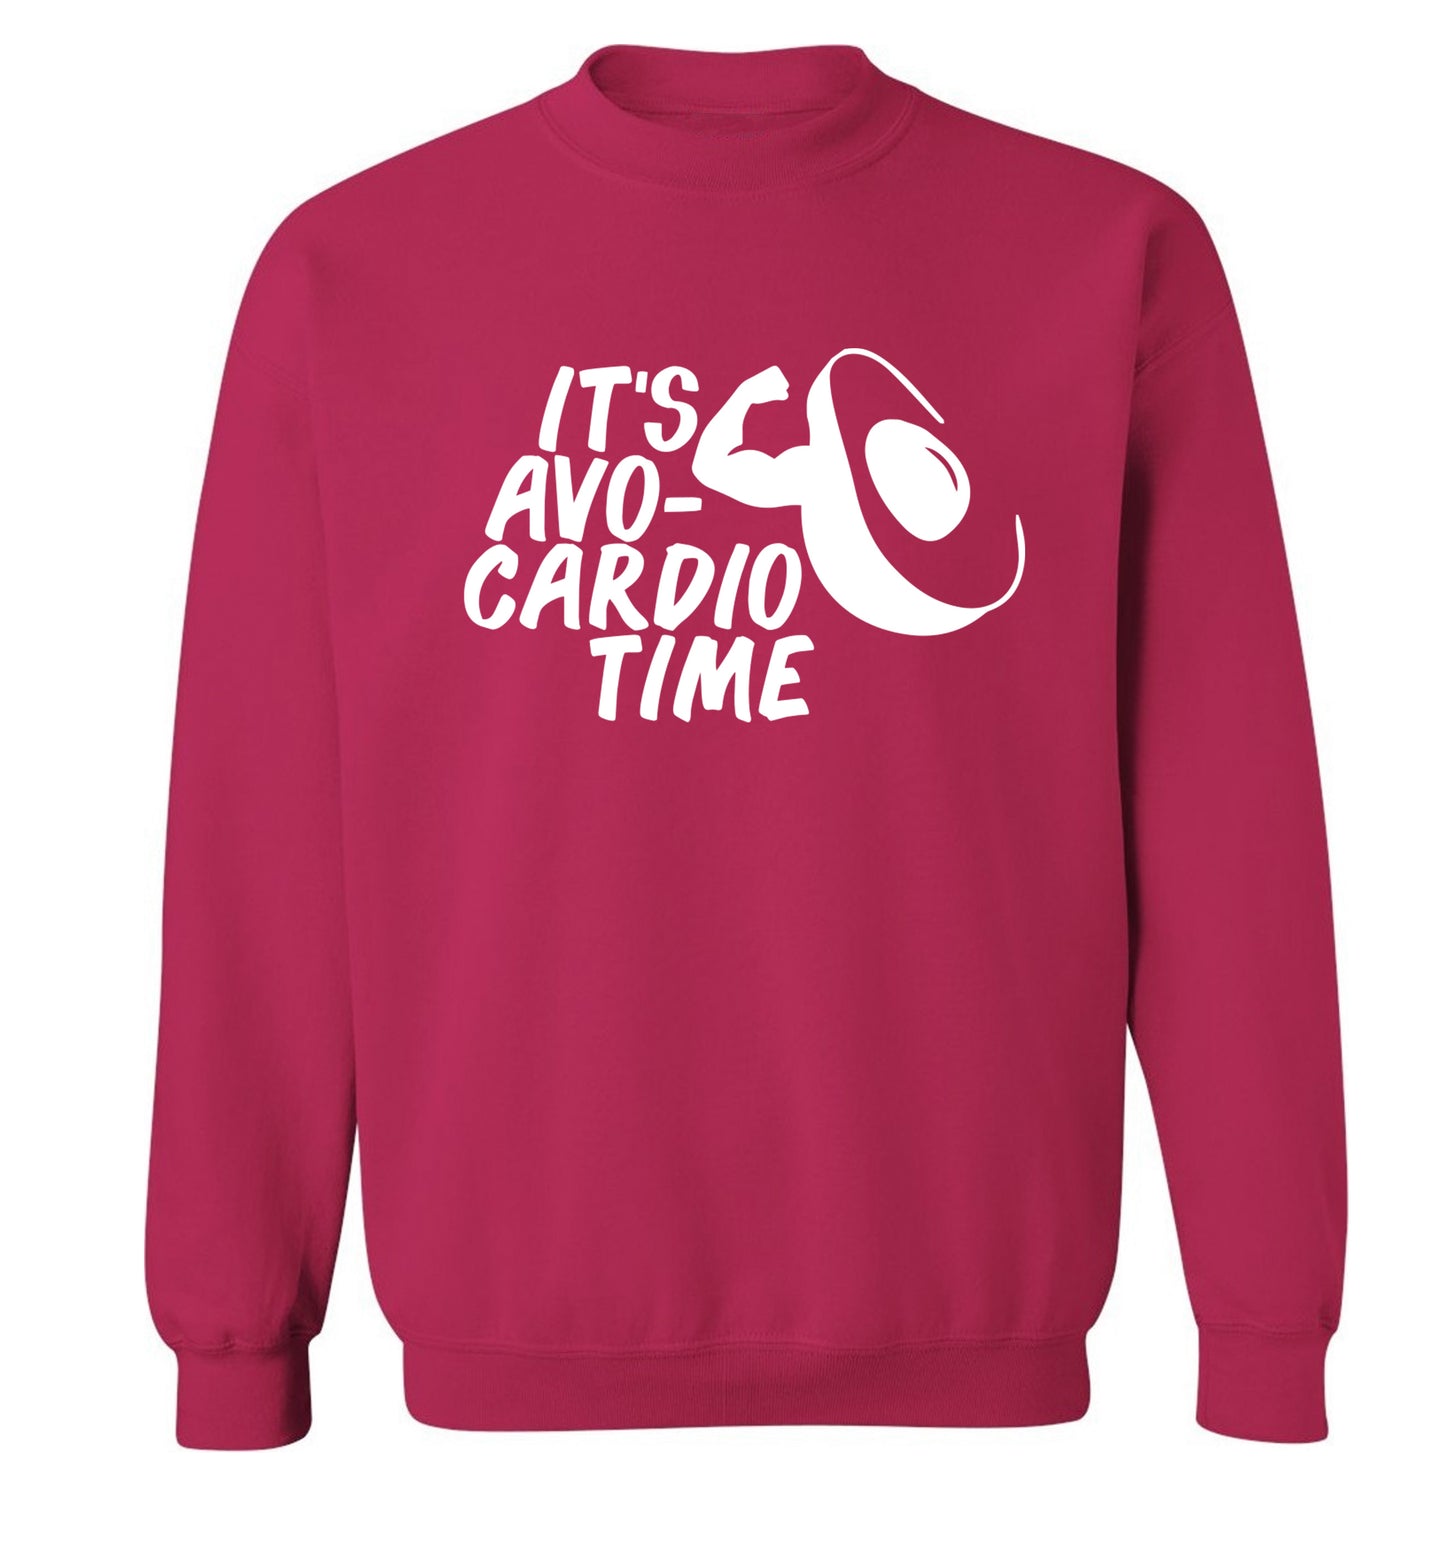 It's avo-cardio time Adult's unisex pink Sweater 2XL